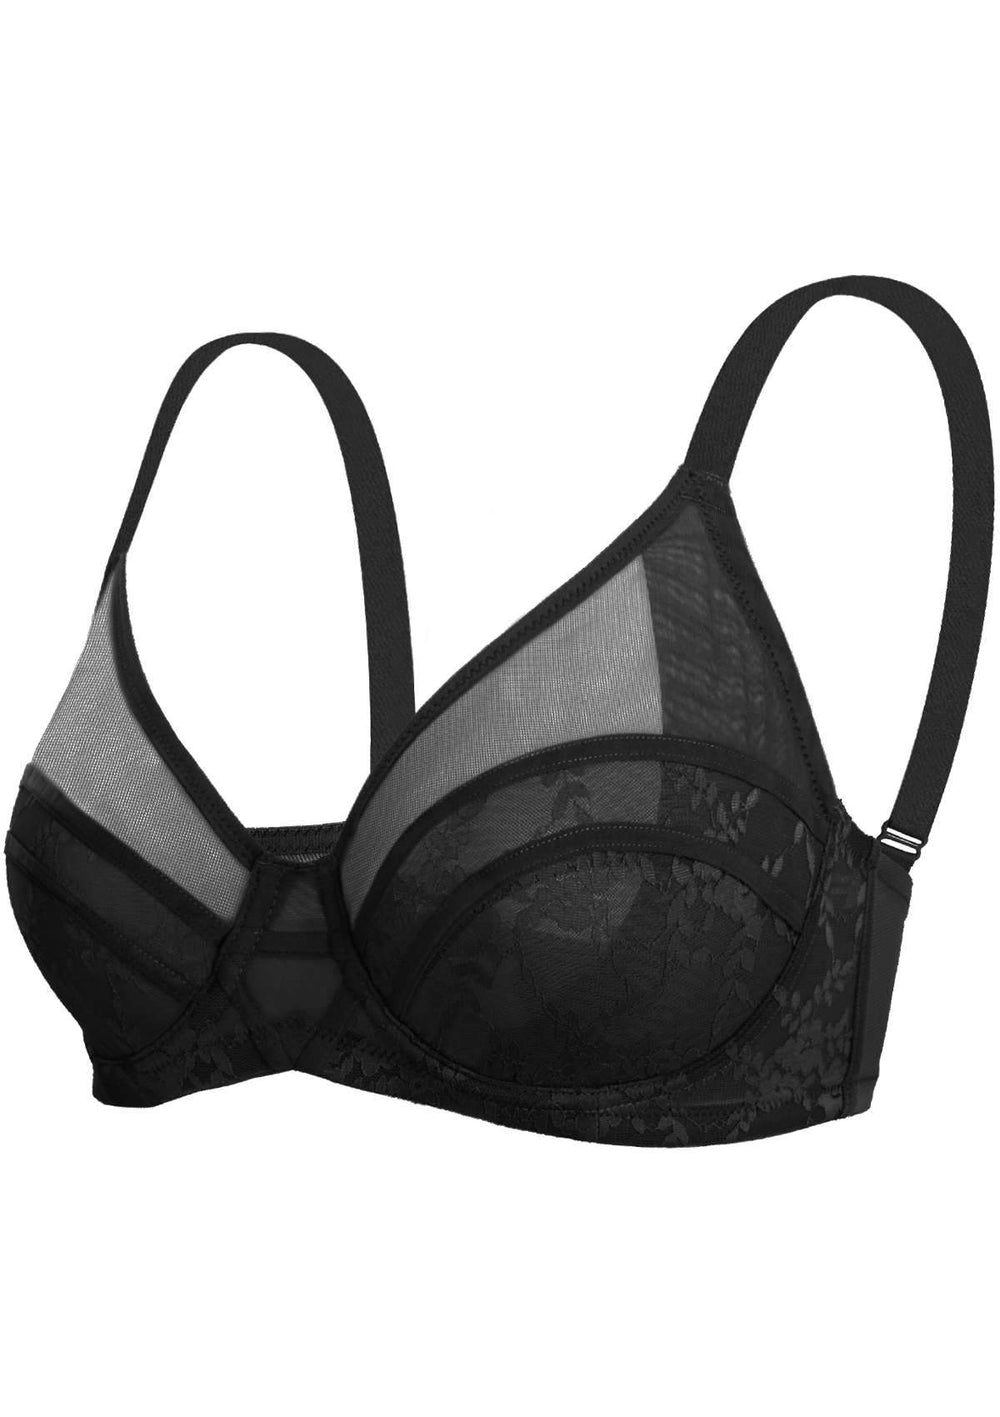 Womens Bras Underwire Lace Sheer Unpadded Bralette See Through